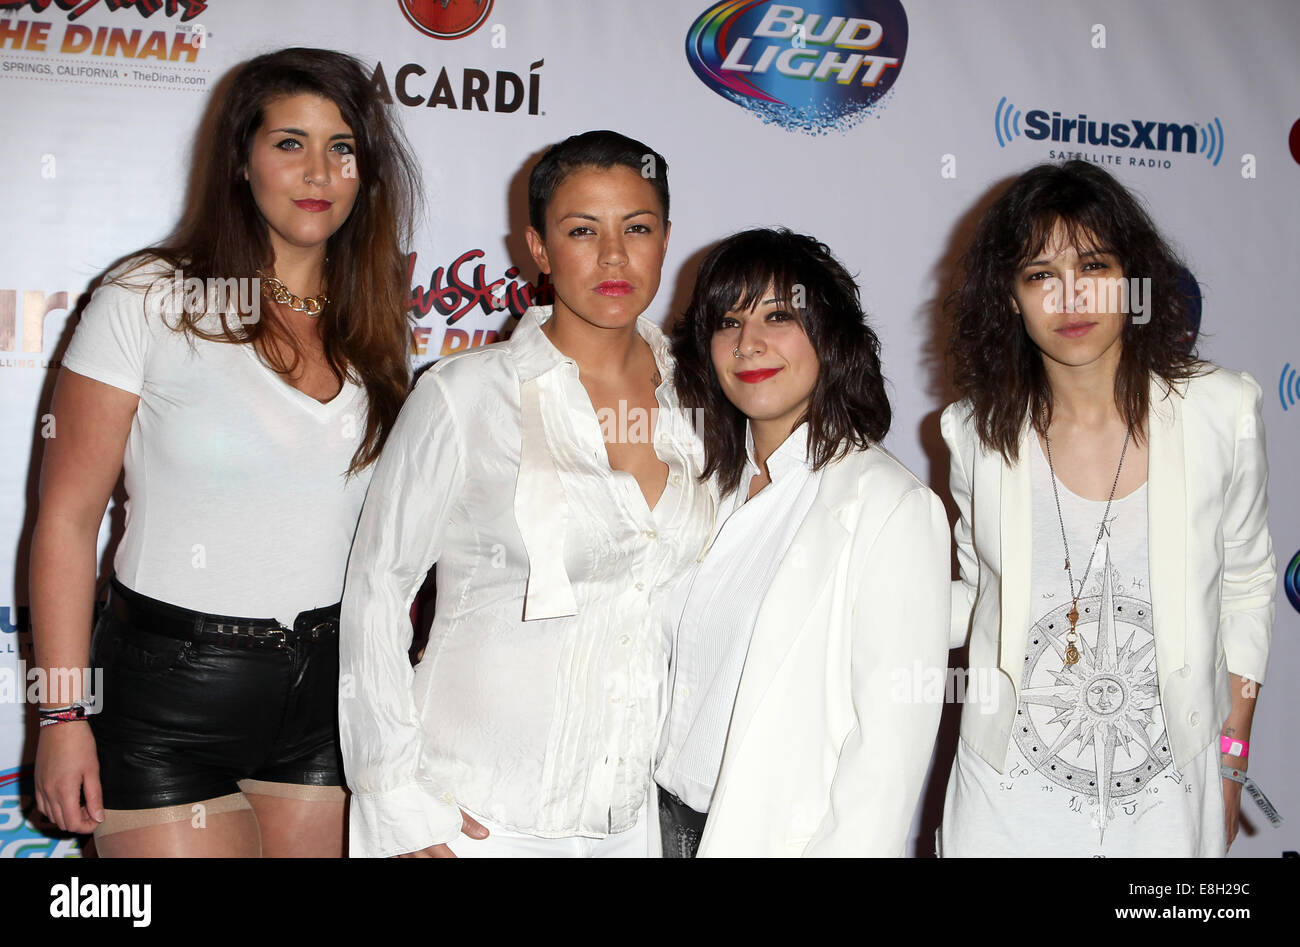 Le week-end, Dinah Shore 2014 jupes Club 'White Party' comprend : HUNTER VALENTINE Où : Palm Spings, California, United States Quand : 04 Avr 2014 Banque D'Images